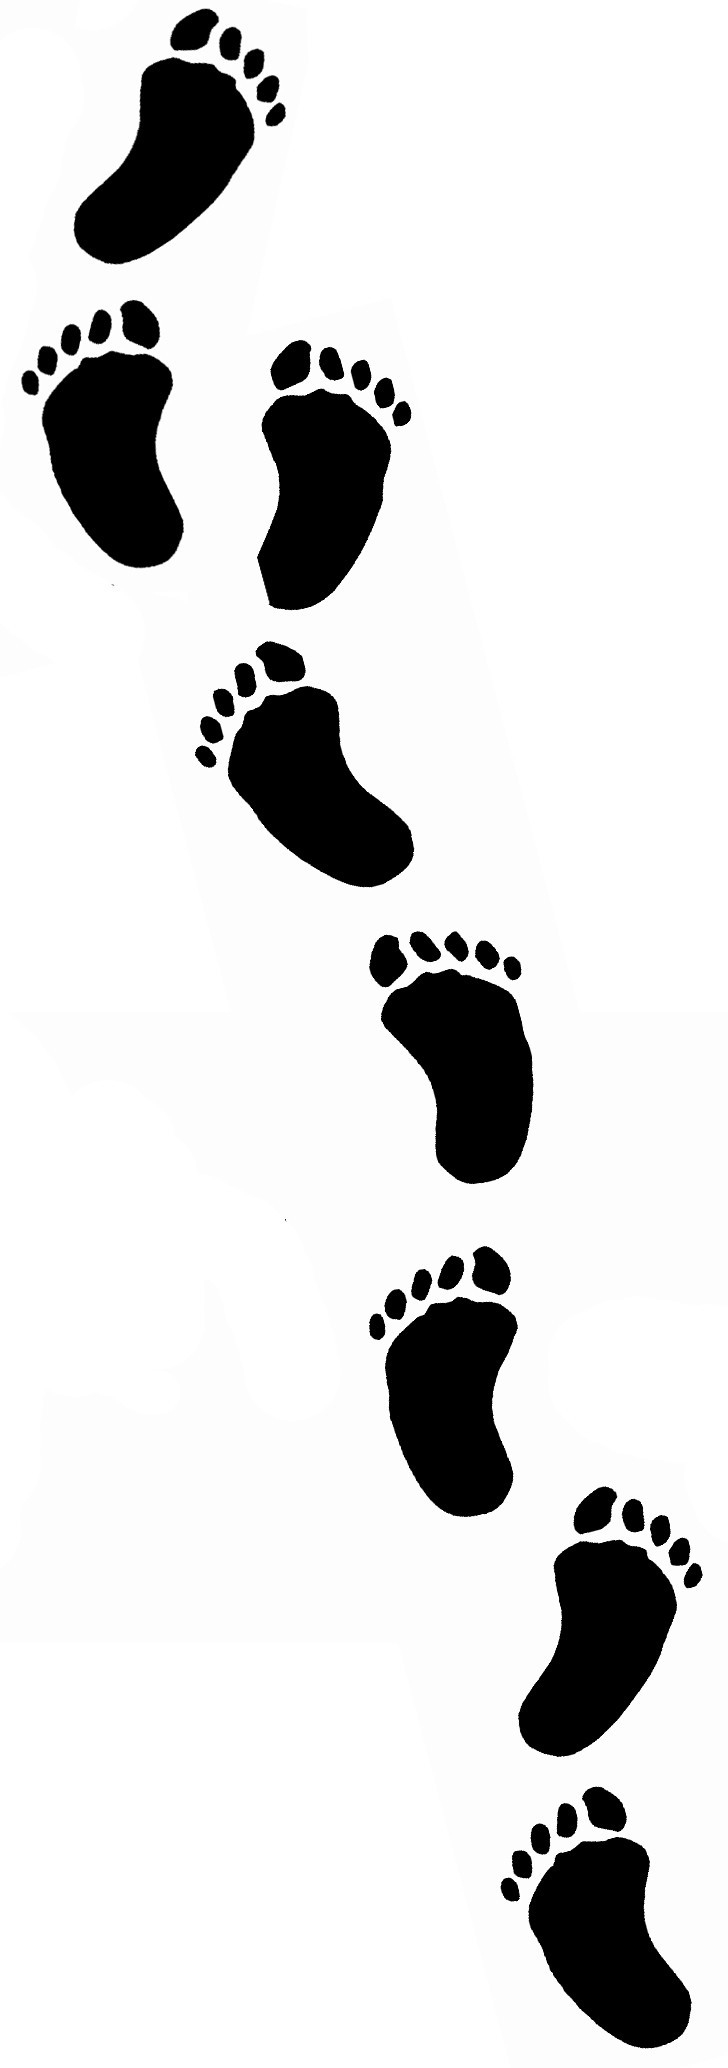 Footprint Clipart Black And White.